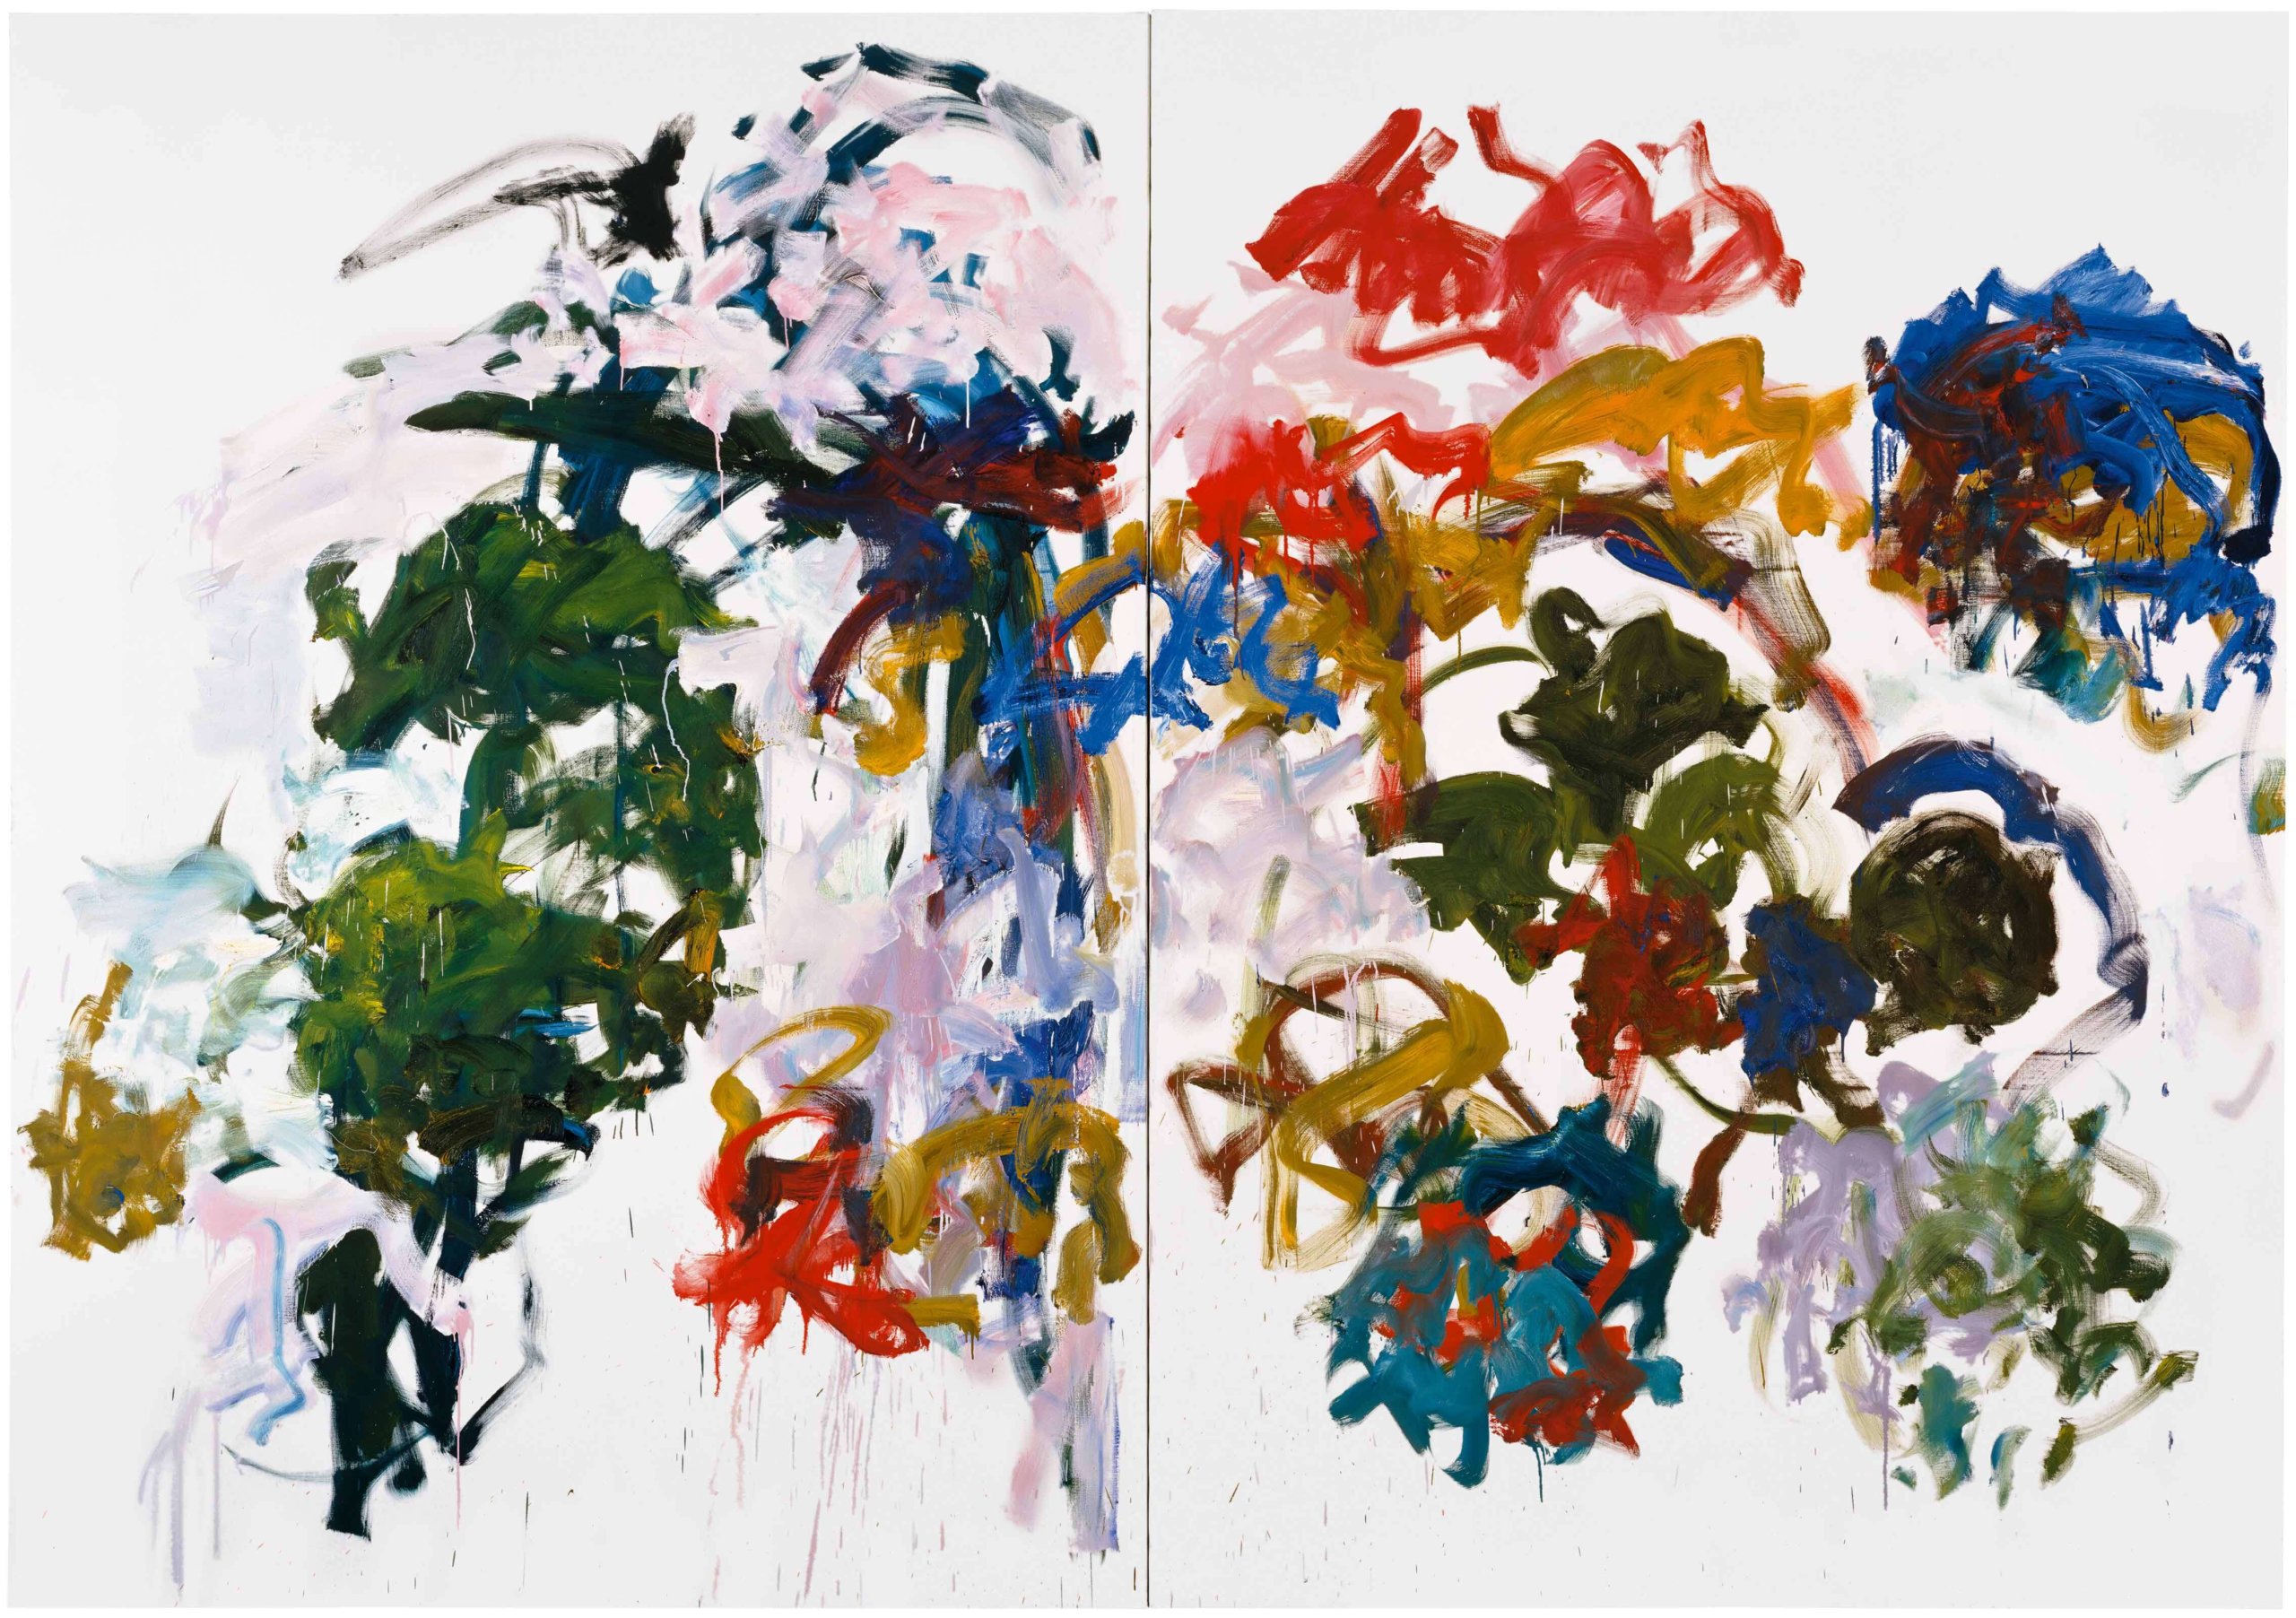 Joan Mitchell, Sunflowers, 1990-1991, oil on canvas, diptych (courtesy of Cheim and Read)